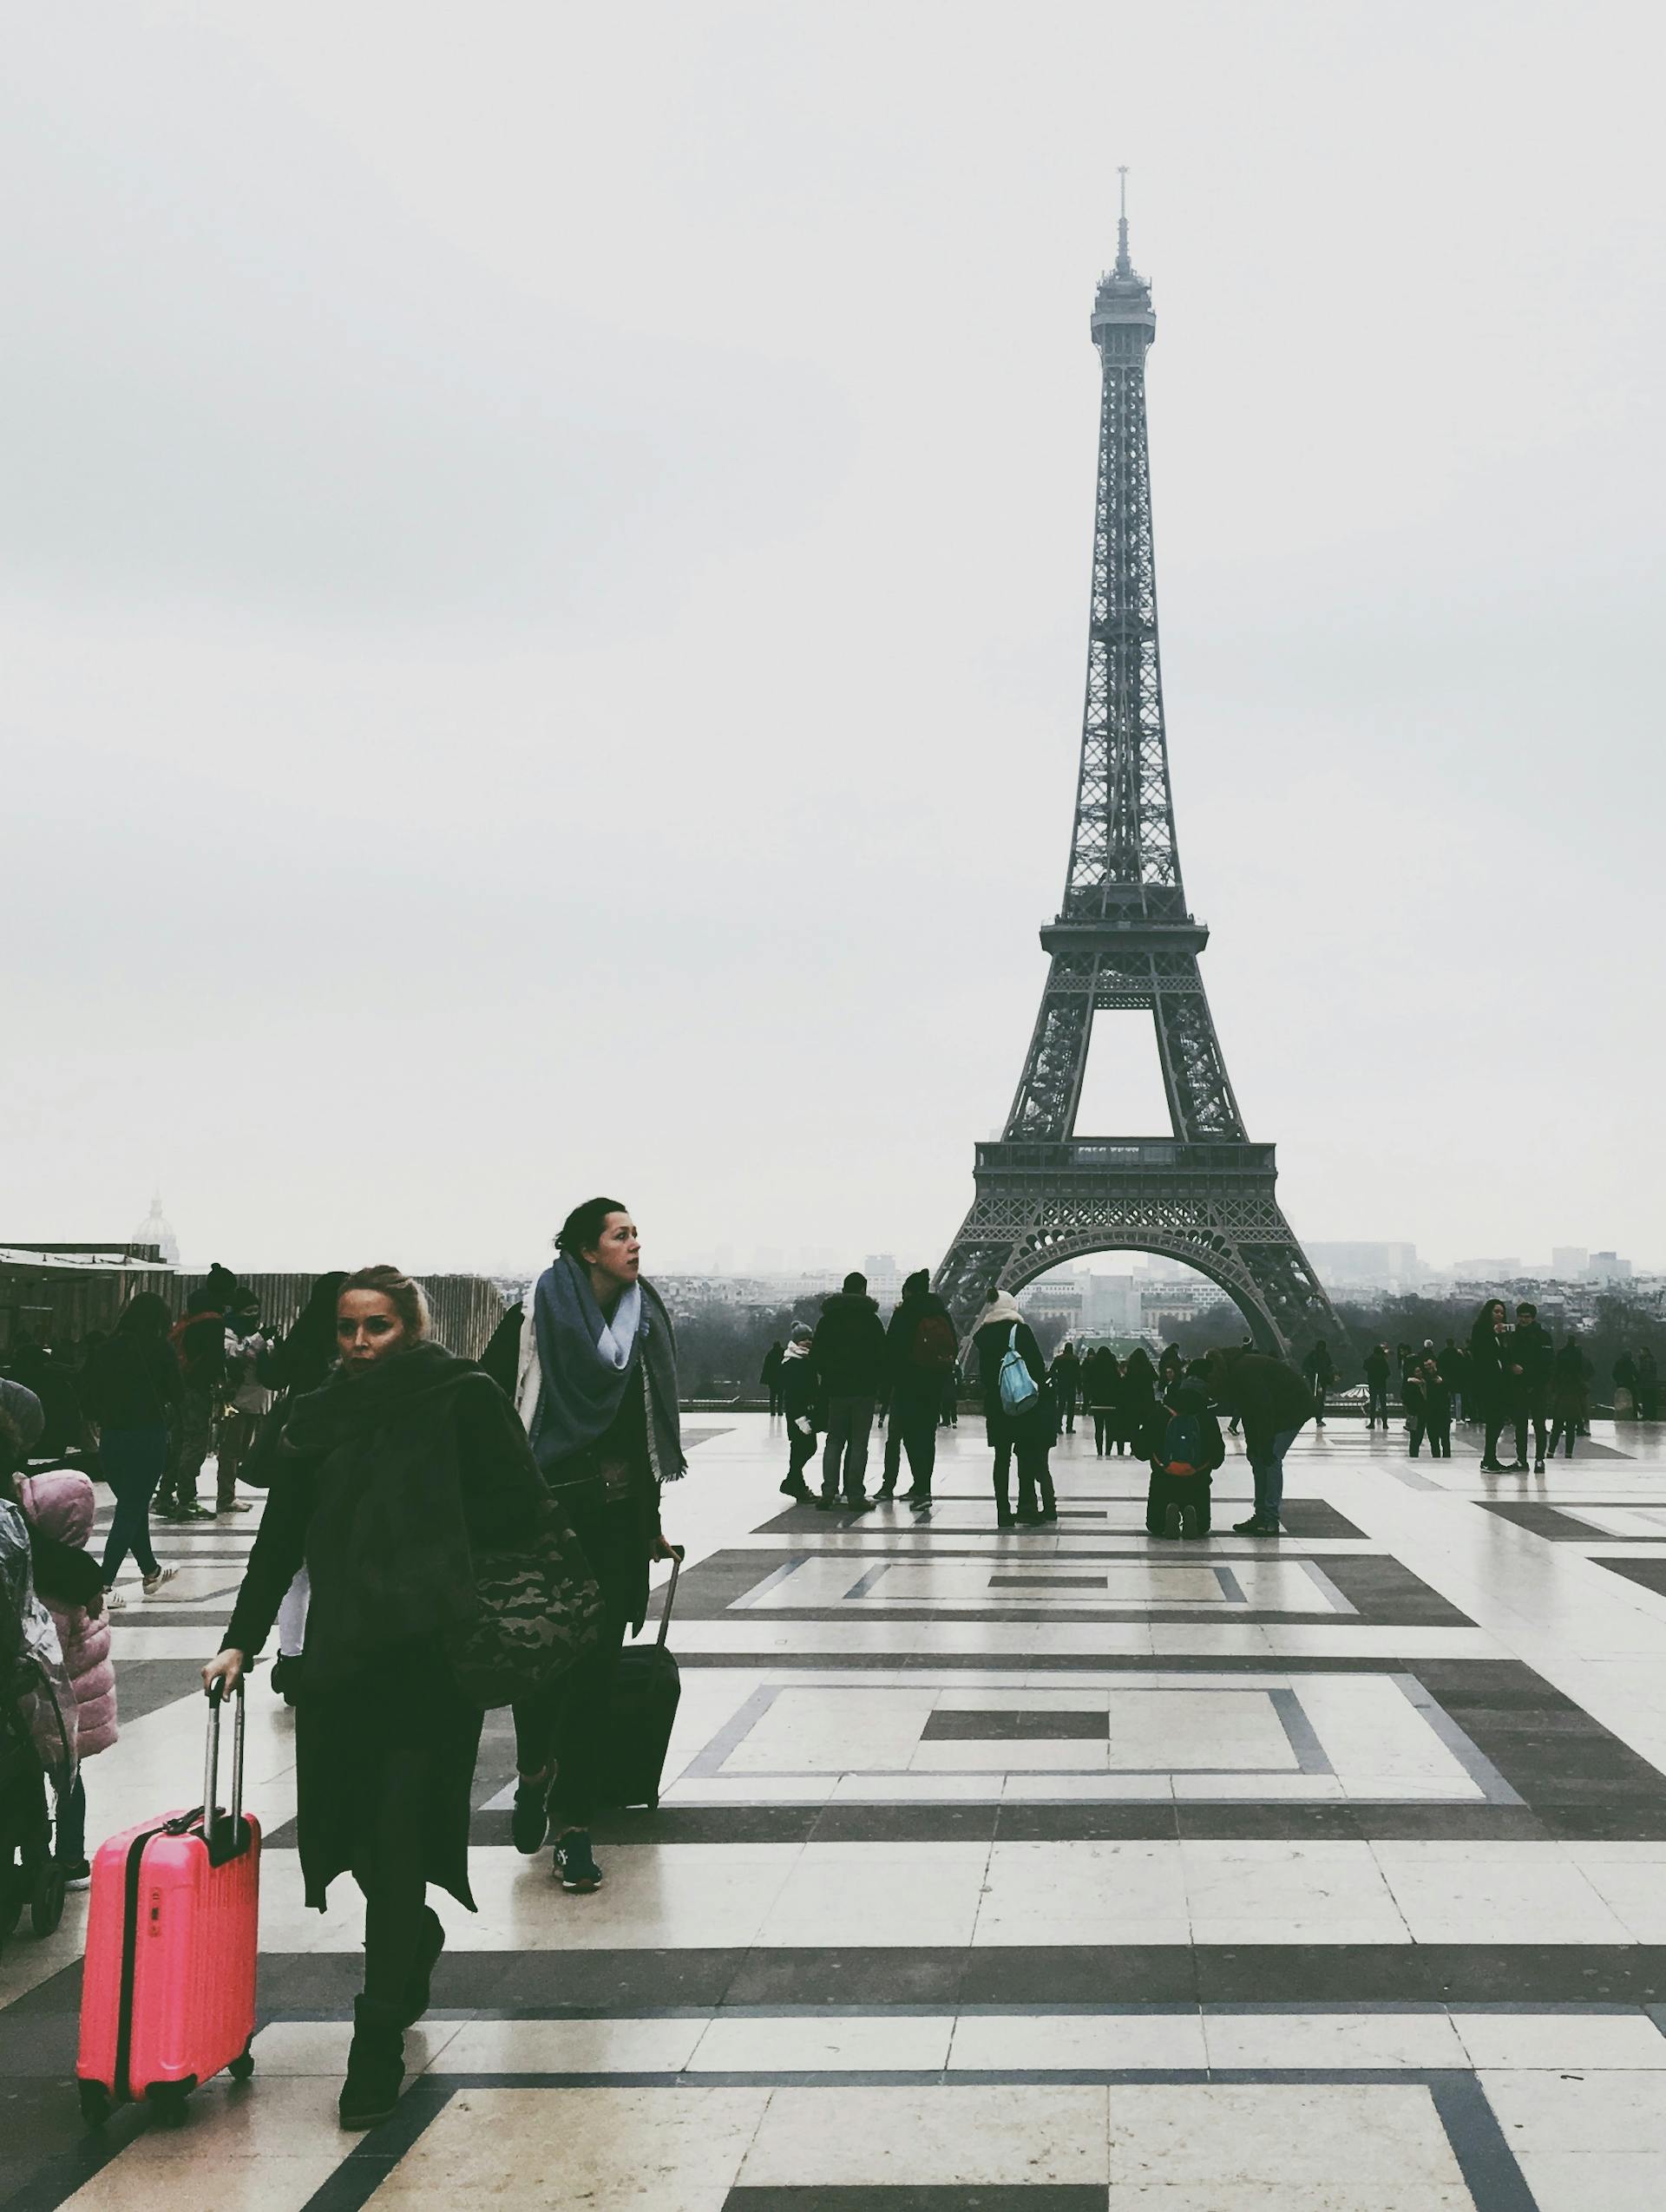 People around the Eiffel Tower | Source: Pexels